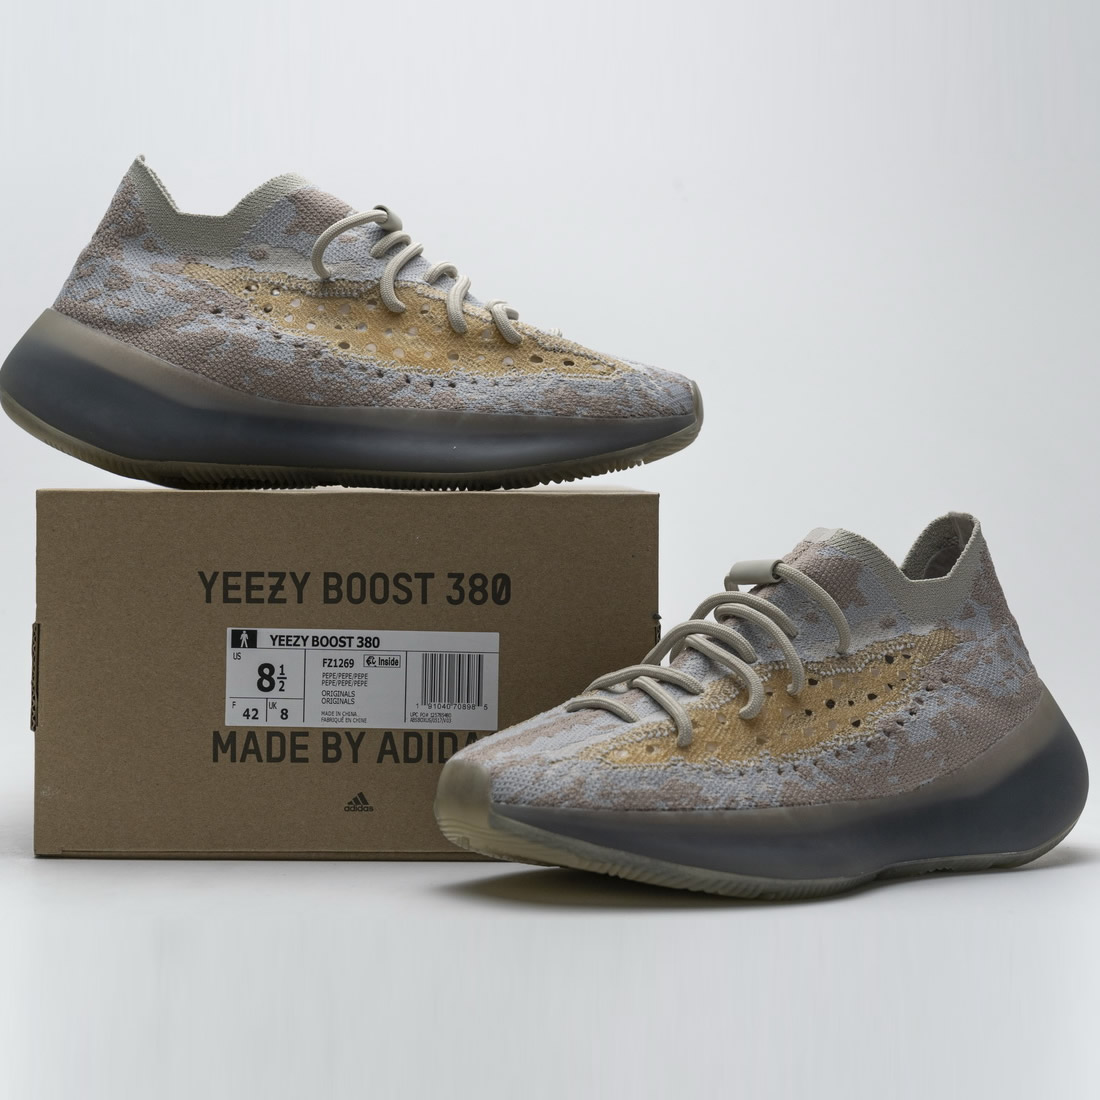 Adidas Yeezy Boost 380 Pepper Non Reflective Fz1269 New Release Date For Sale 5 - kickbulk.co